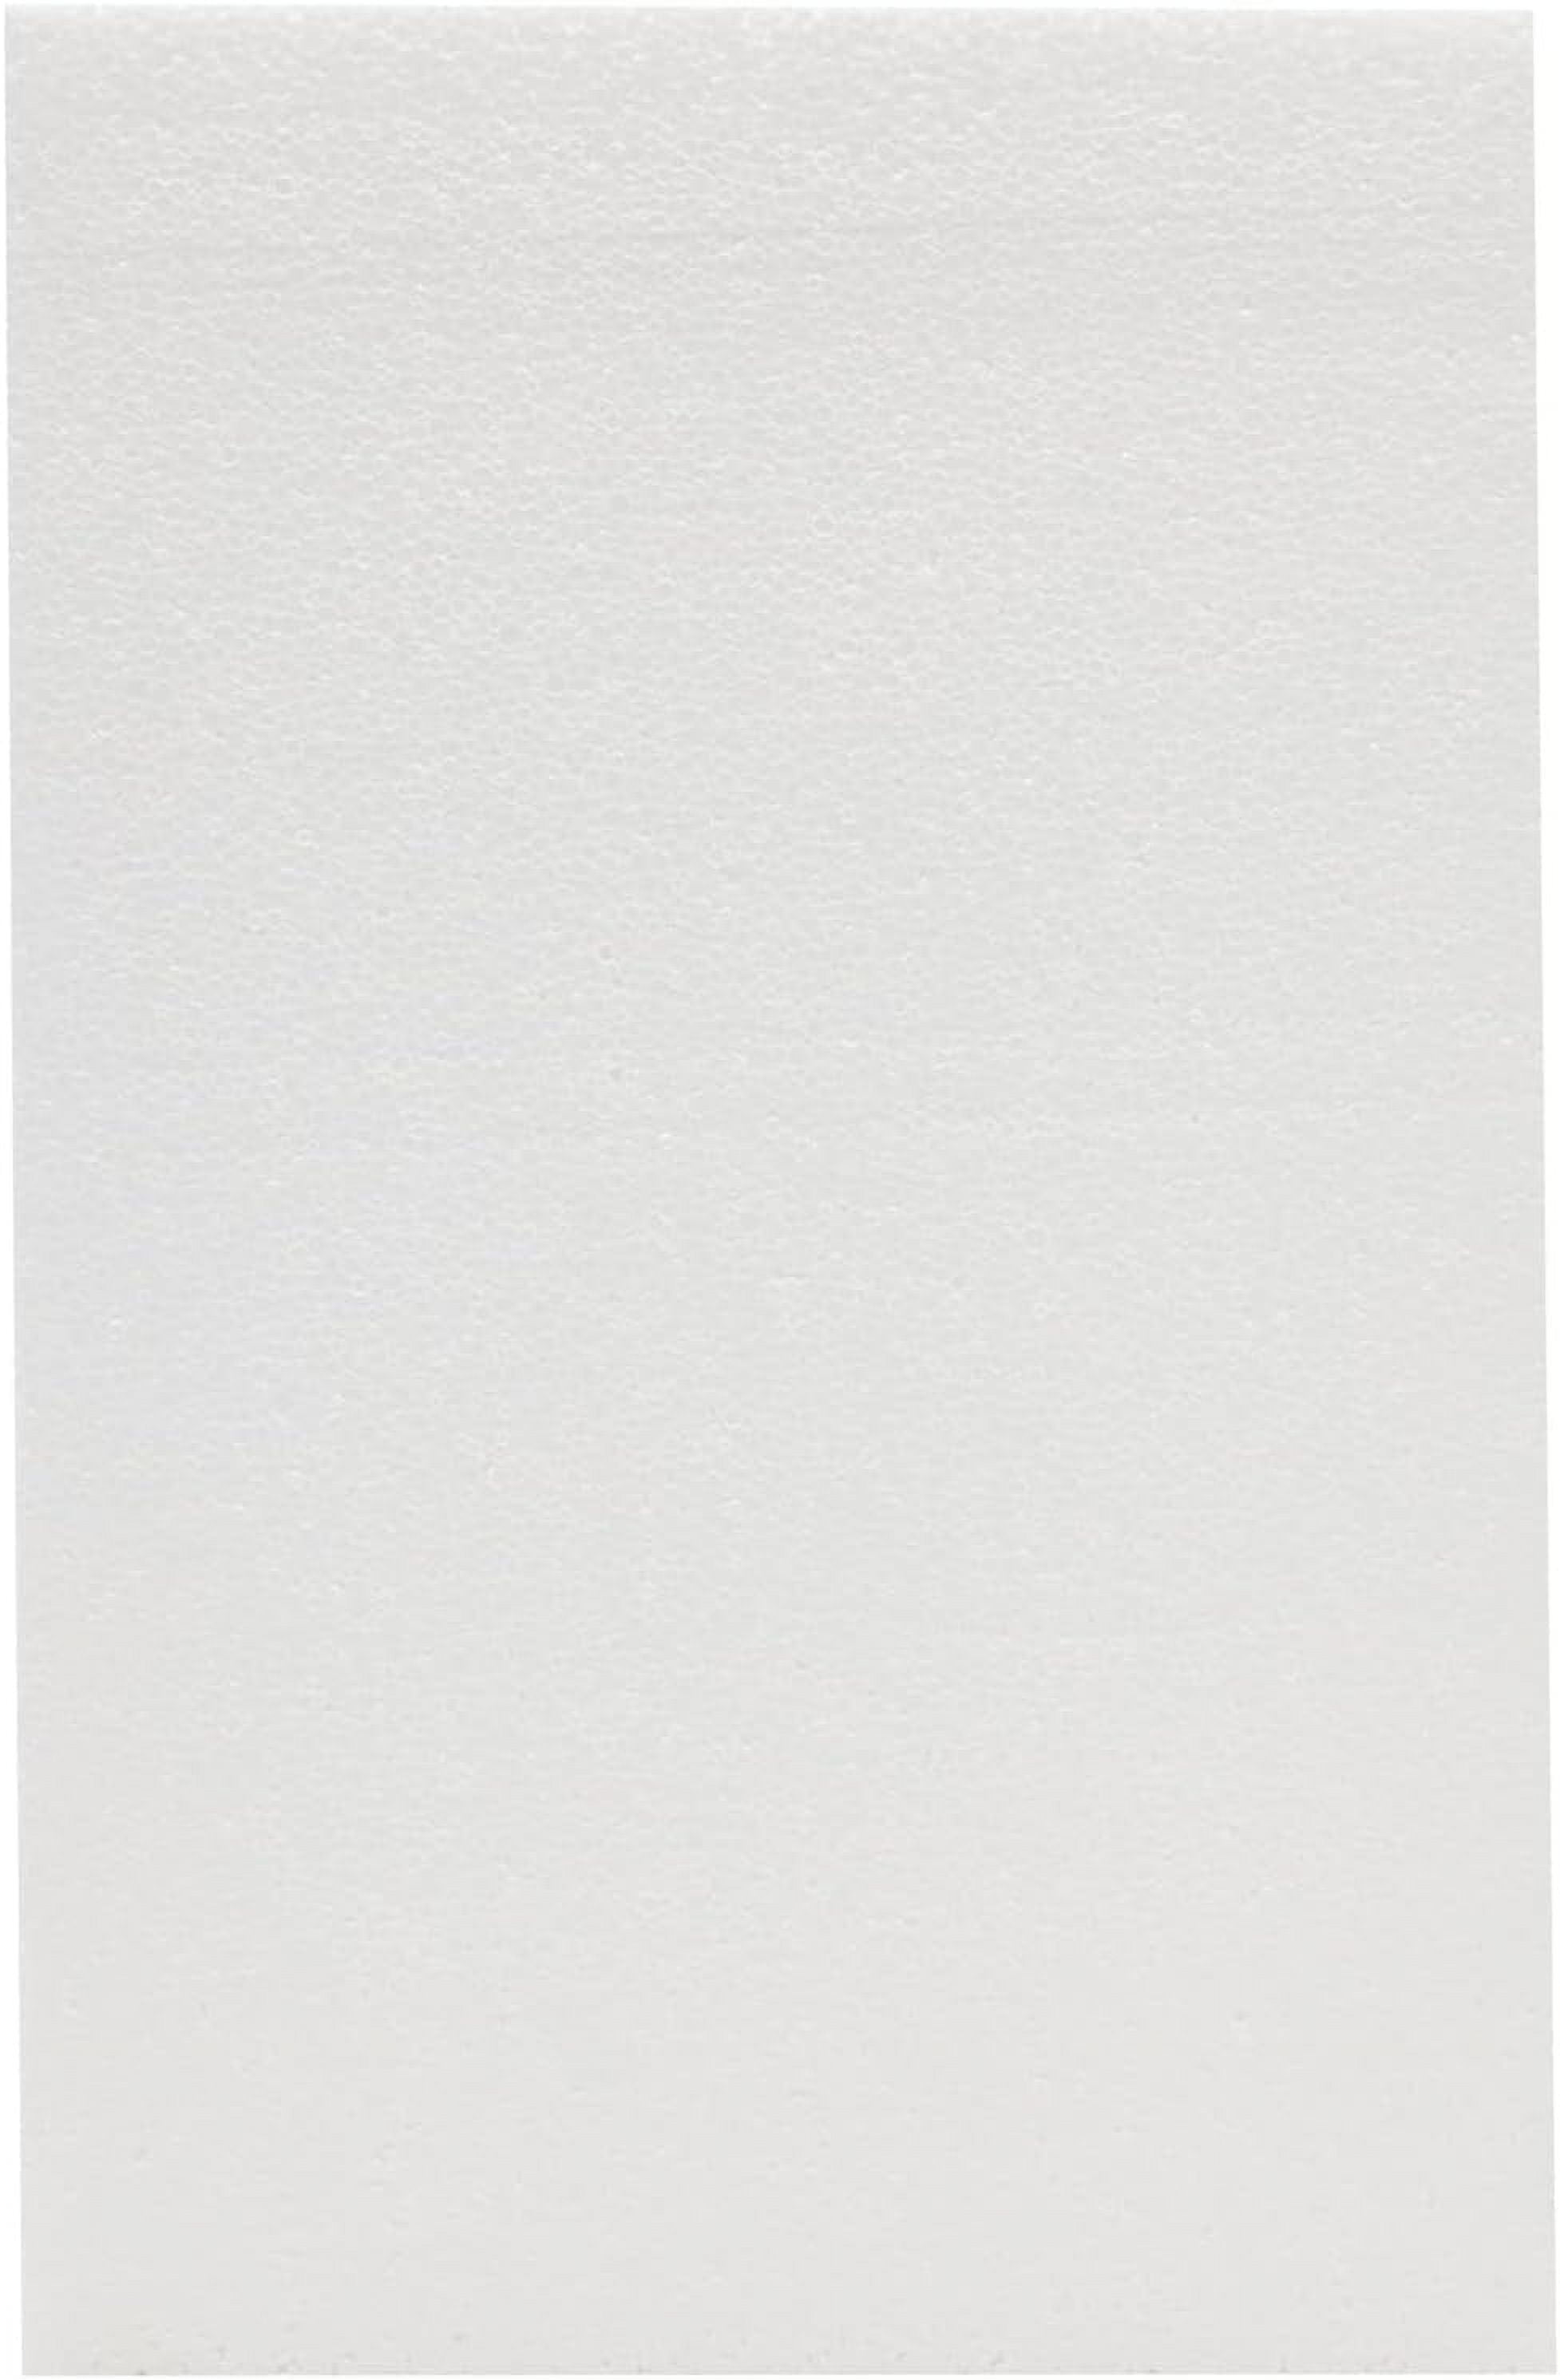  1 Inch Thick Foam Board Sheets - 6 Pack 17x11 Inch